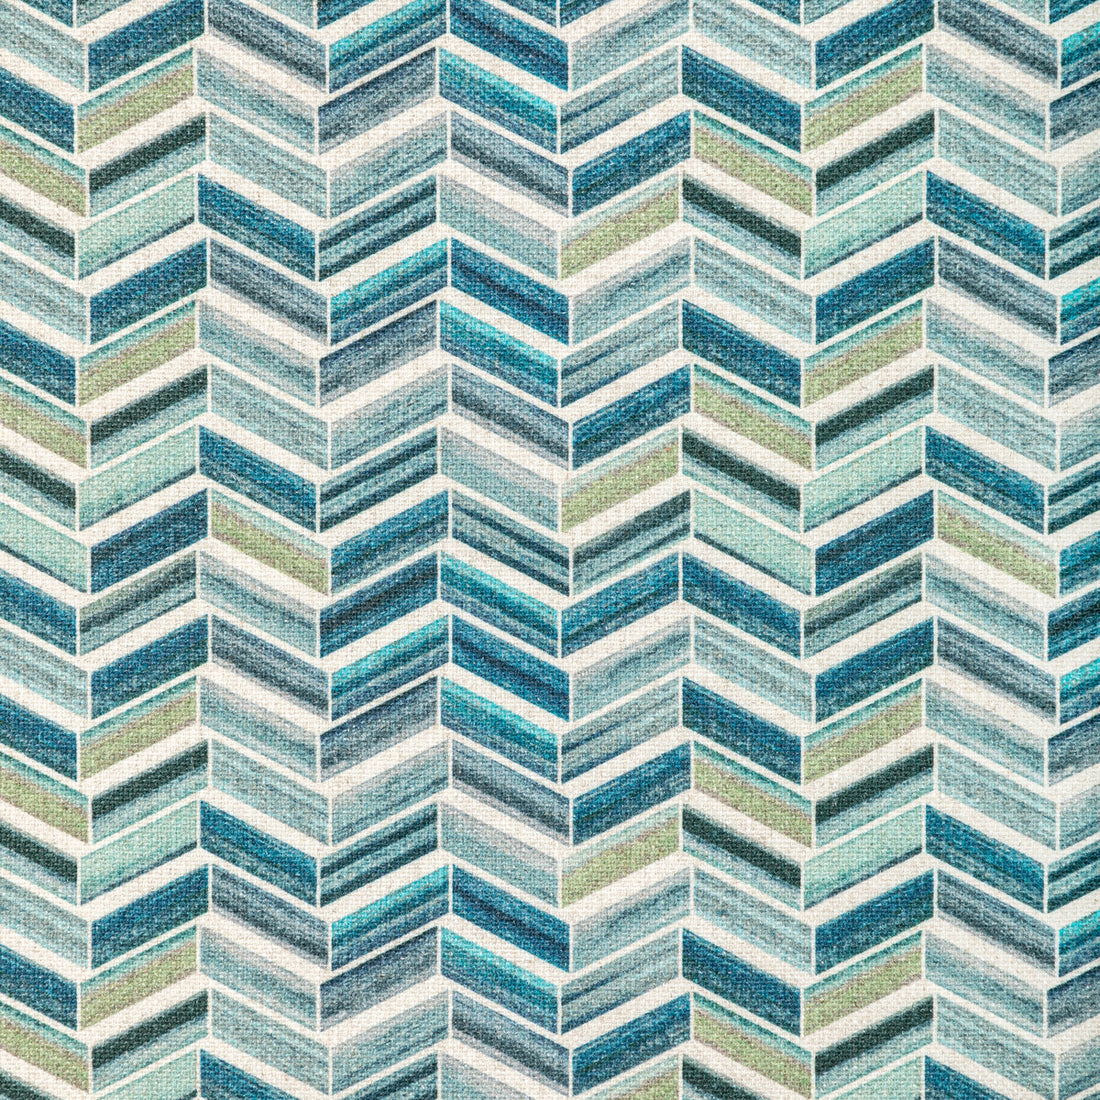 Somersault fabric in splash color - pattern SOMERSAULT.516.0 - by Kravet Design in the Nadia Watts Gem collection